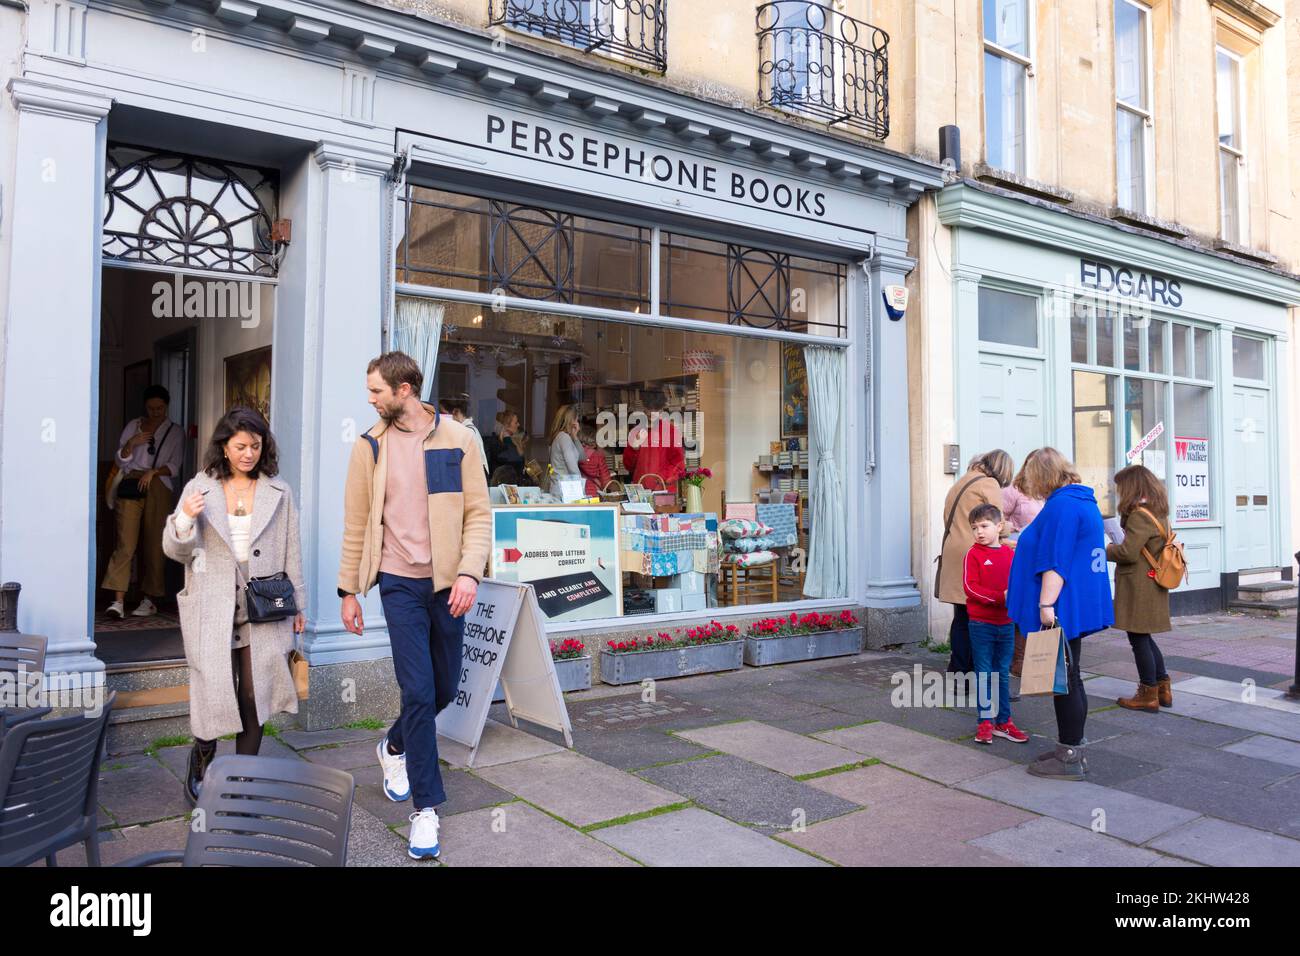 Looking through the window of Persephone Books in Bath Spa, Somerset, UK. This independent bookshop and publishing house for mainly women writers. Stock Photo